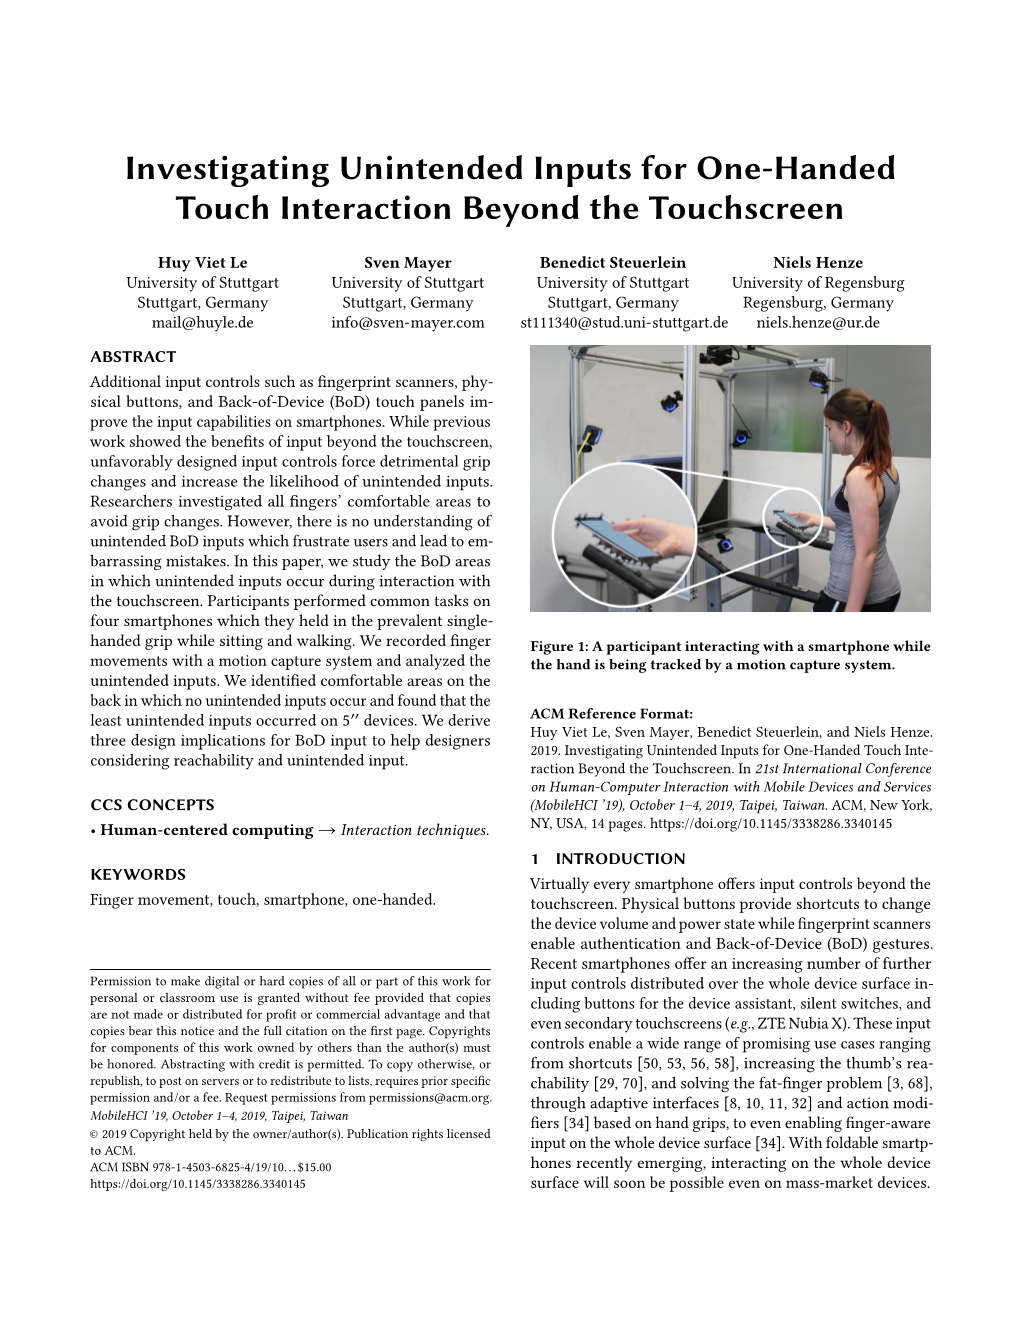 Investigating Unintended Inputs for One-Handed Touch Interaction Beyond the Touchscreen